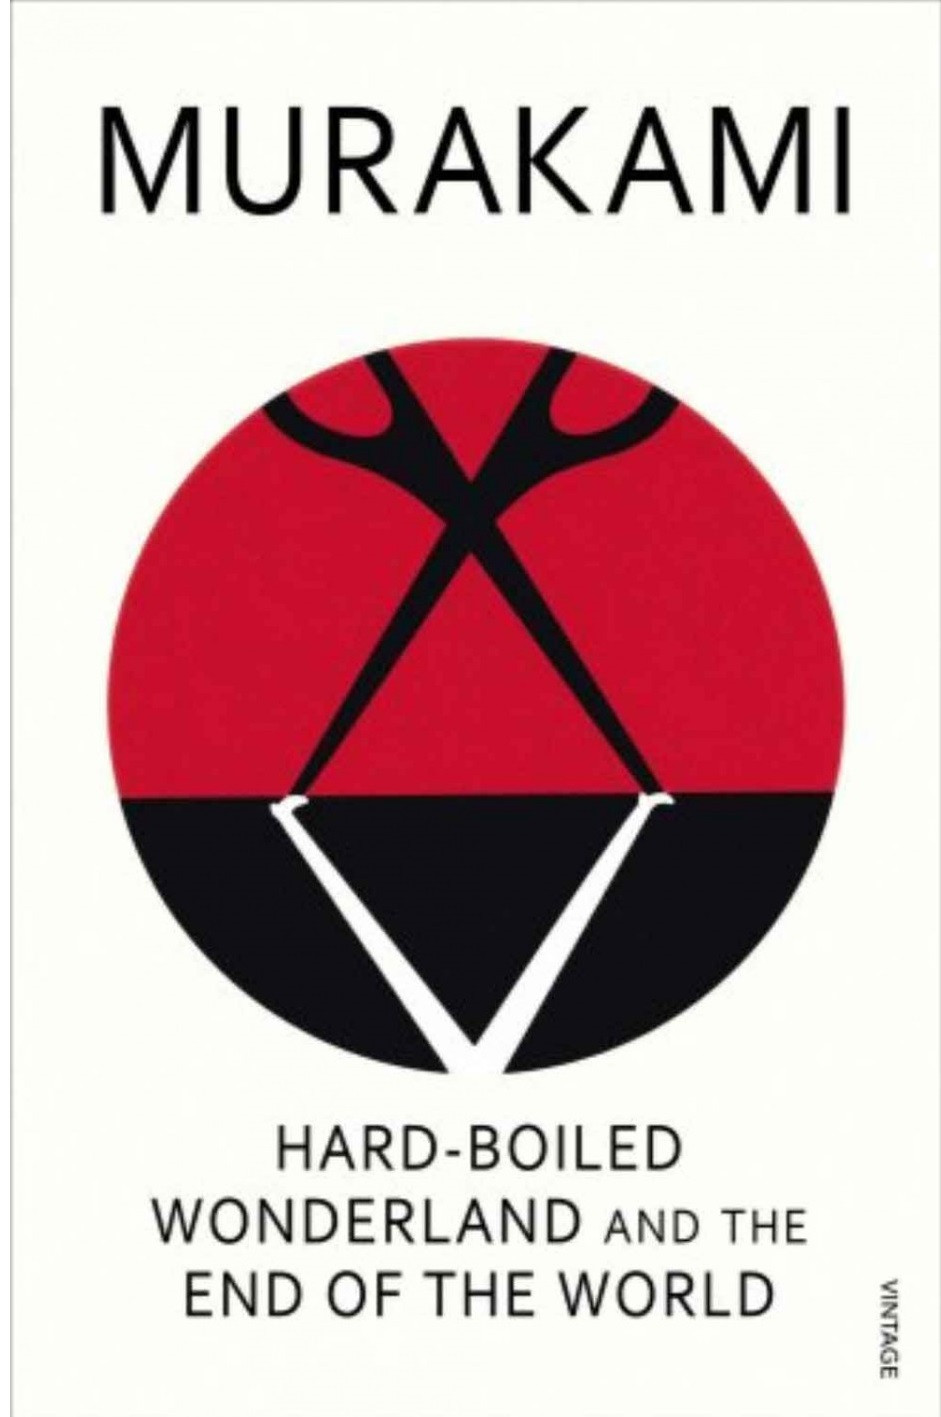 Hard – boiled wonderland and the end of world